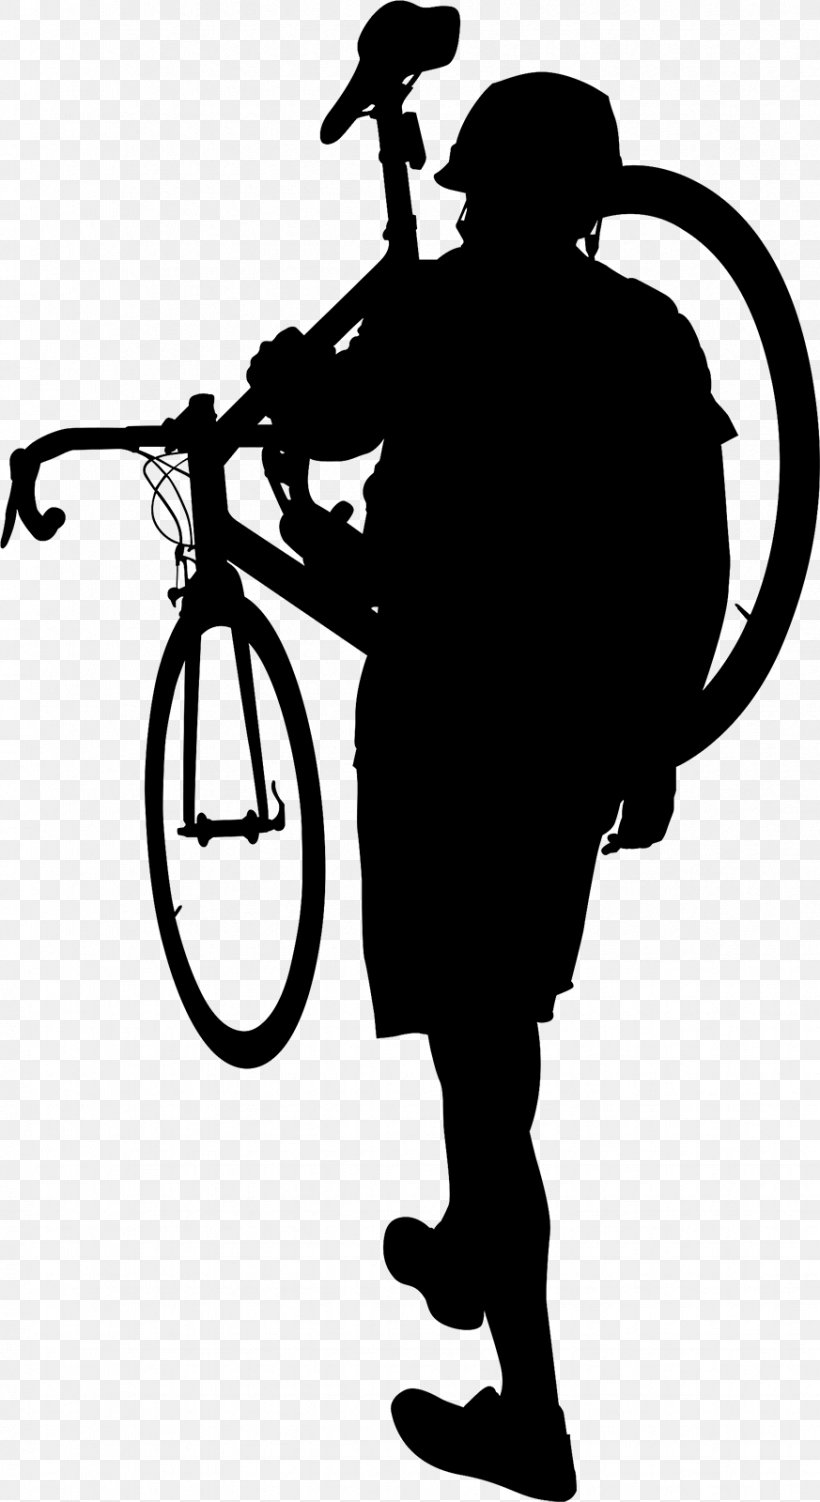 Bicycle Clip Art Mellophone Silhouette, PNG, 873x1600px, Bicycle, Cycling, Mellophone, Silhouette Download Free